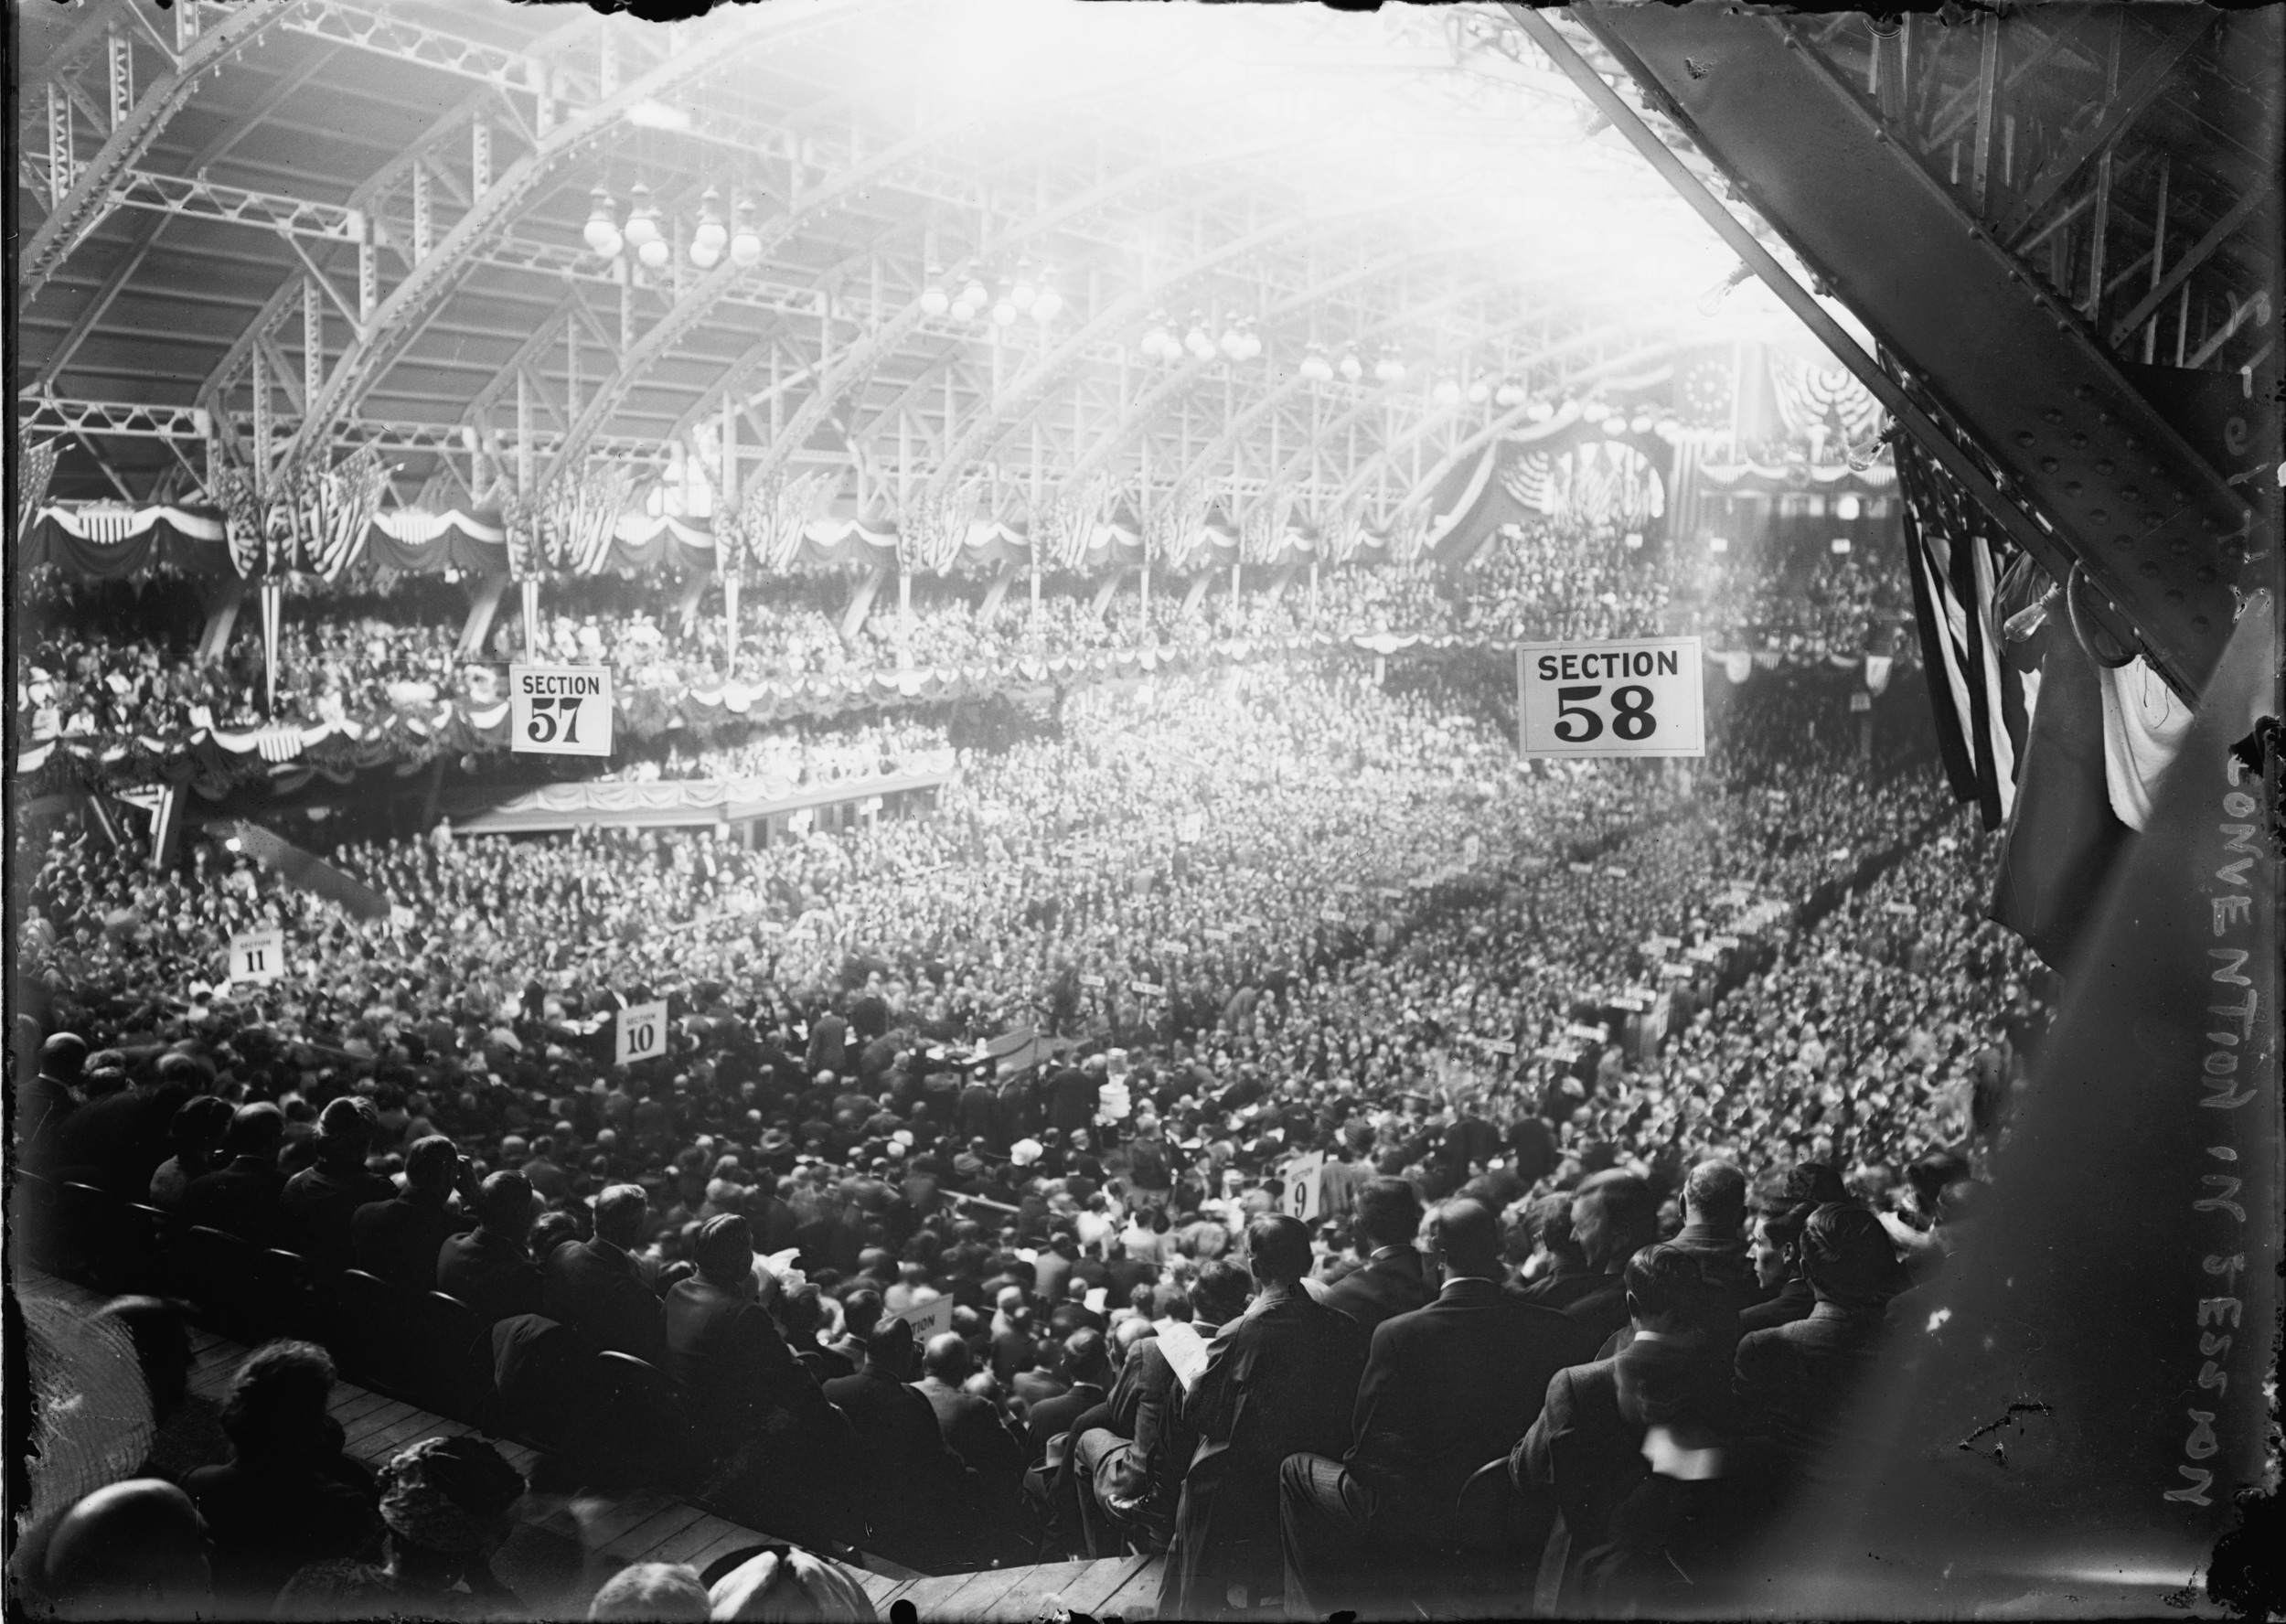 Republican National Convention - June 18-22, 1912